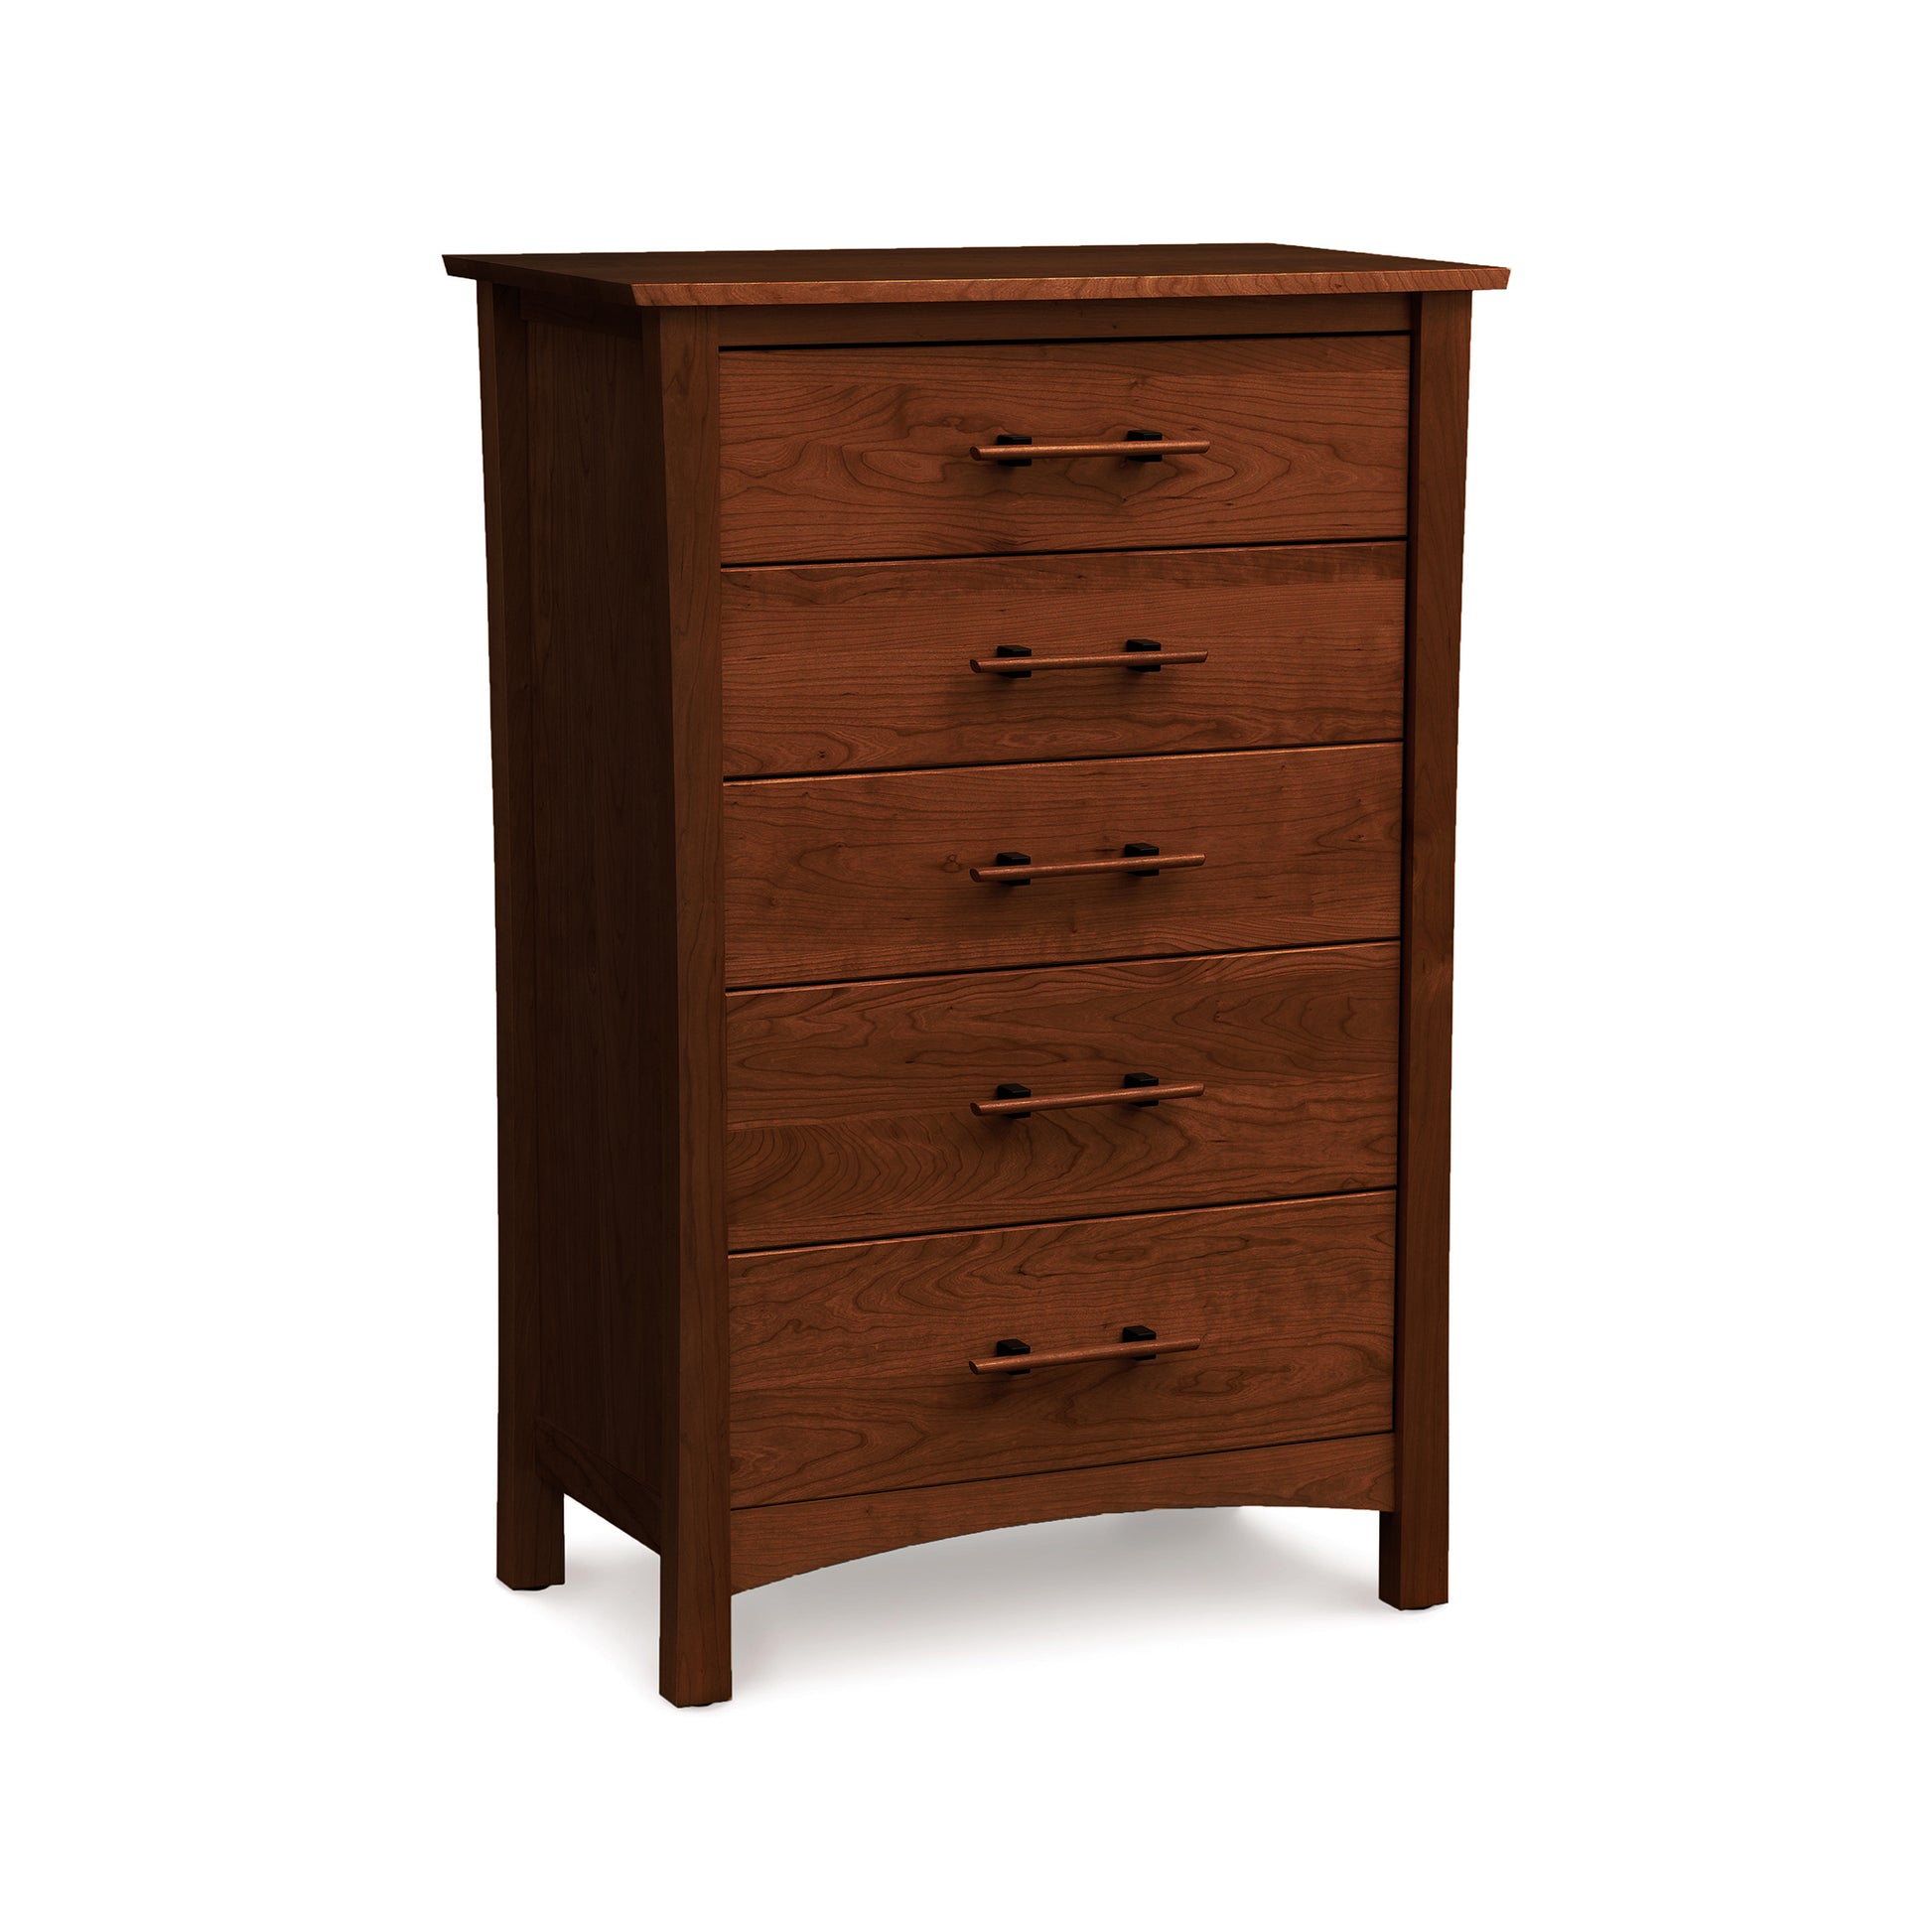 A cherry wood Copeland Furniture Monterey 5-Drawer Chest stands against a white background.